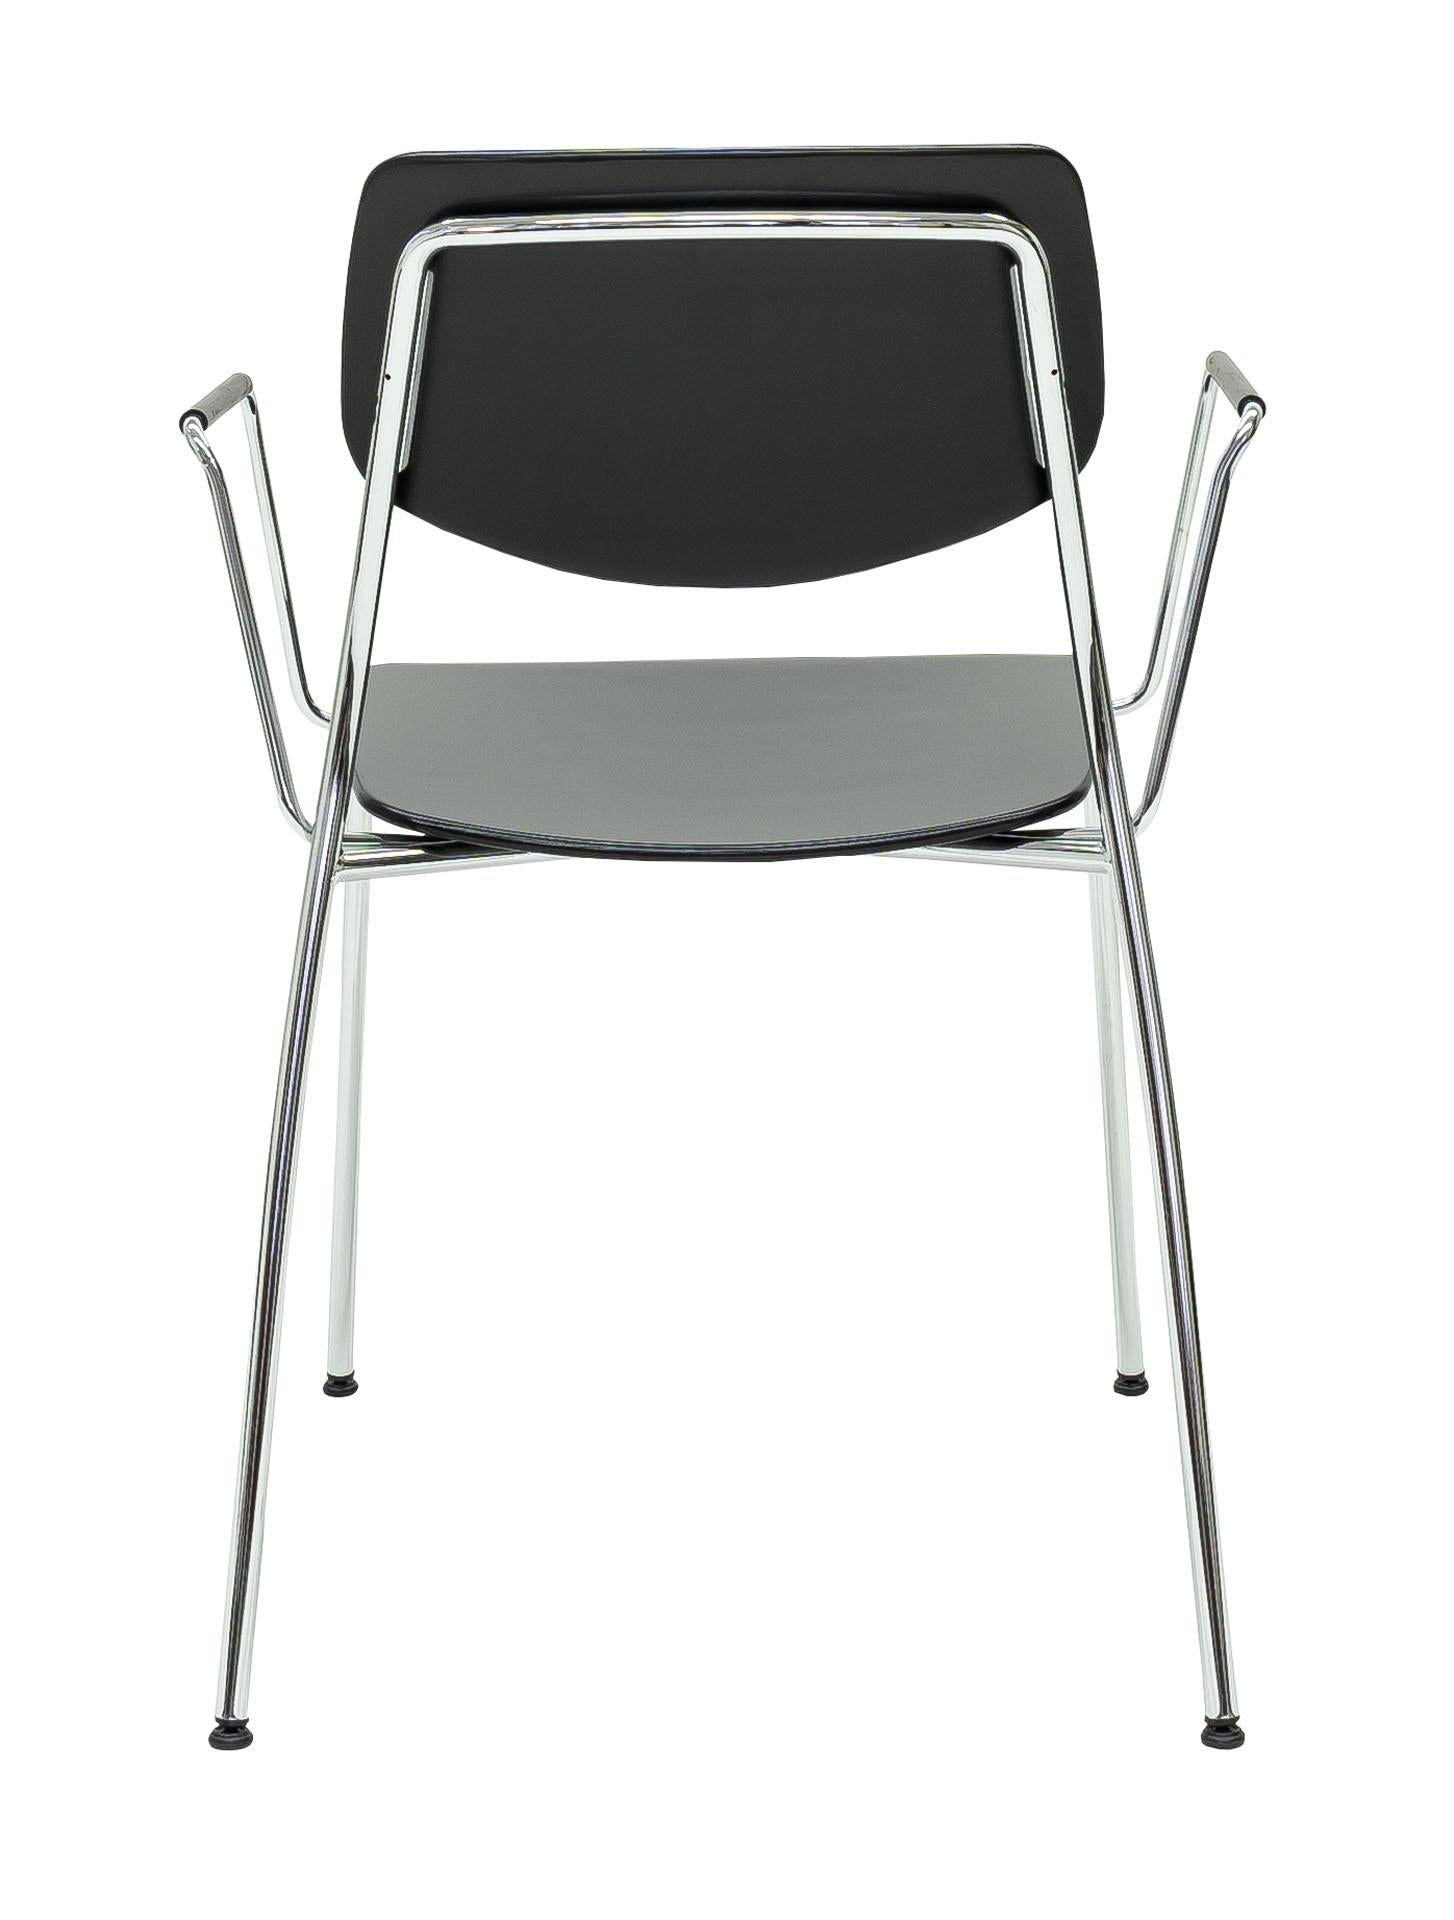 Modern Dietiker Felber C14 Metal Dining Chair with Arms, Modular Design, Set of 4 For Sale